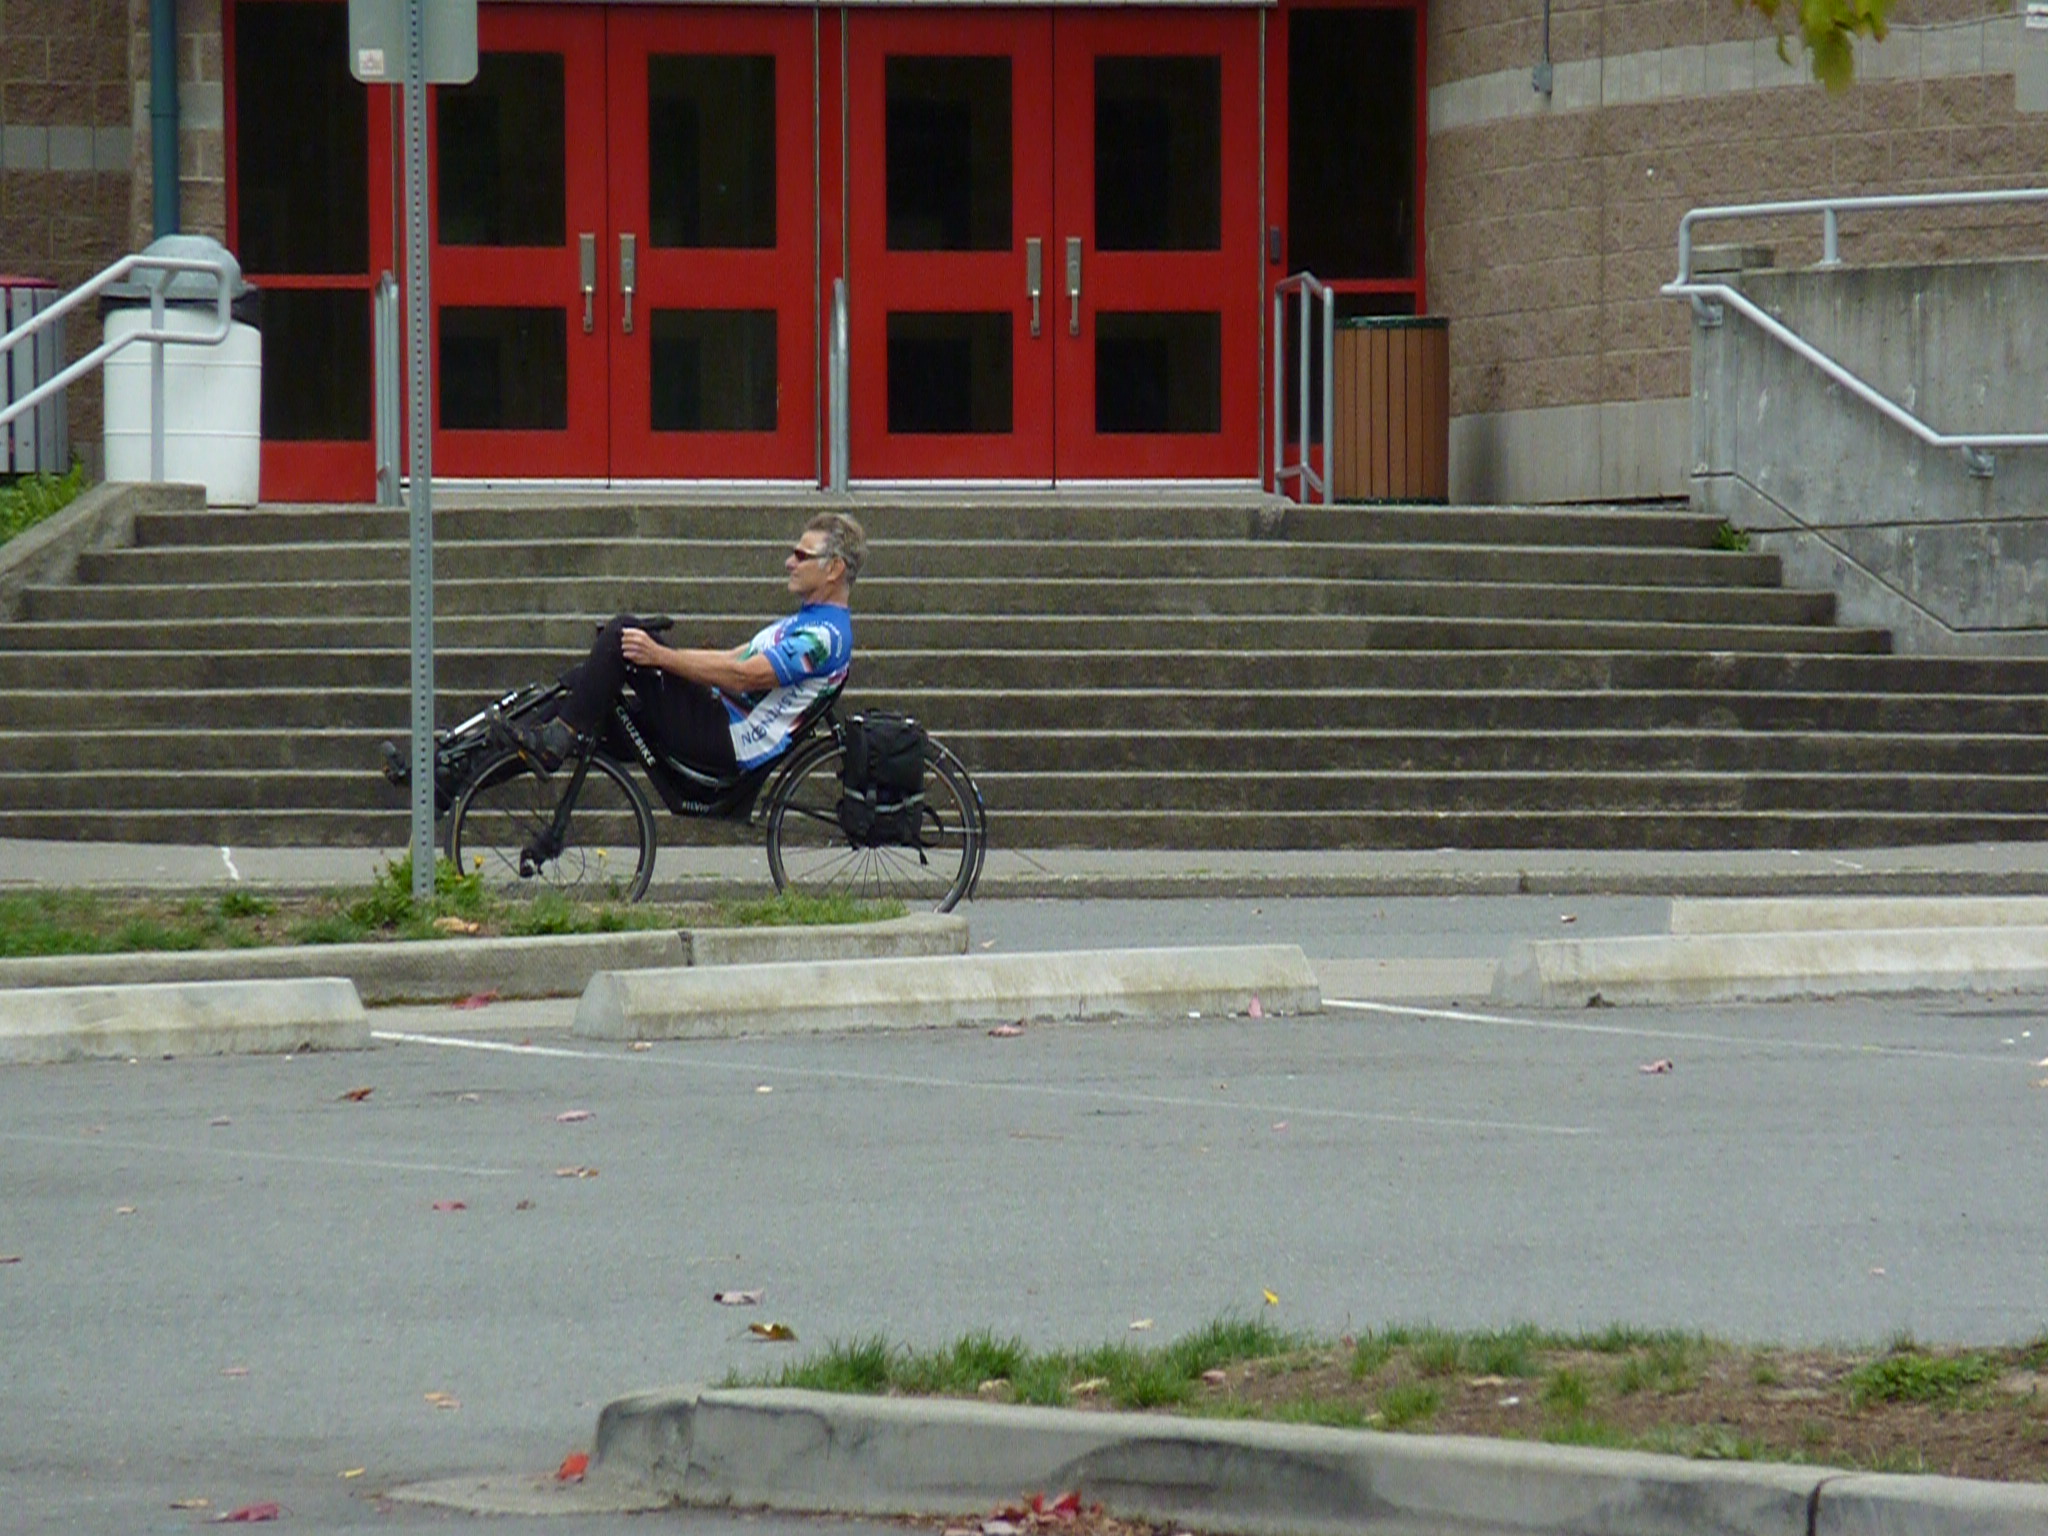 the man is sitting on his bike in front of stairs